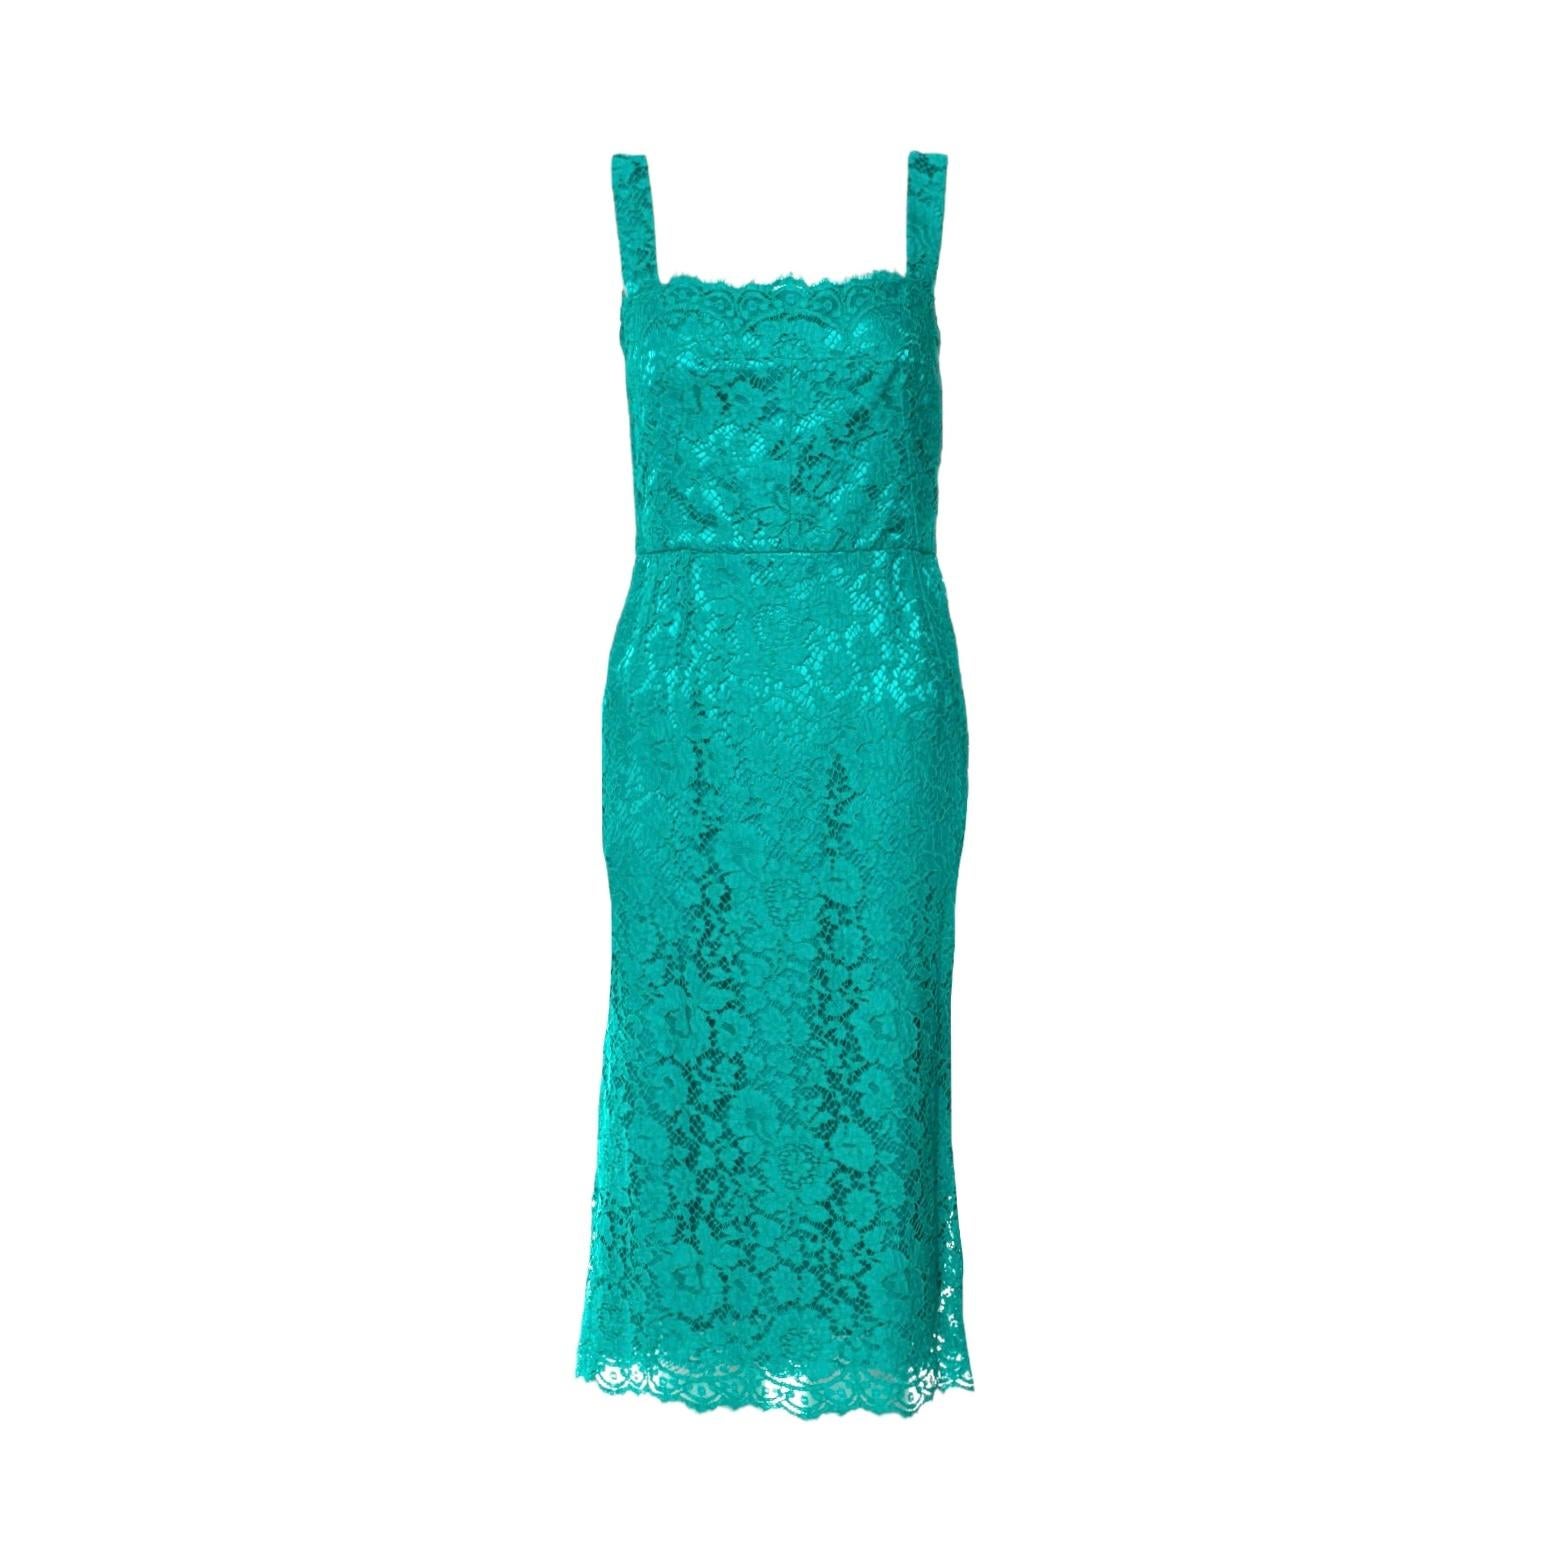 NEW Dolce & Gabbana Turquoise Aqua Lace Crystal Floral Buttons Shift Dress 40 In Excellent Condition For Sale In Switzerland, CH